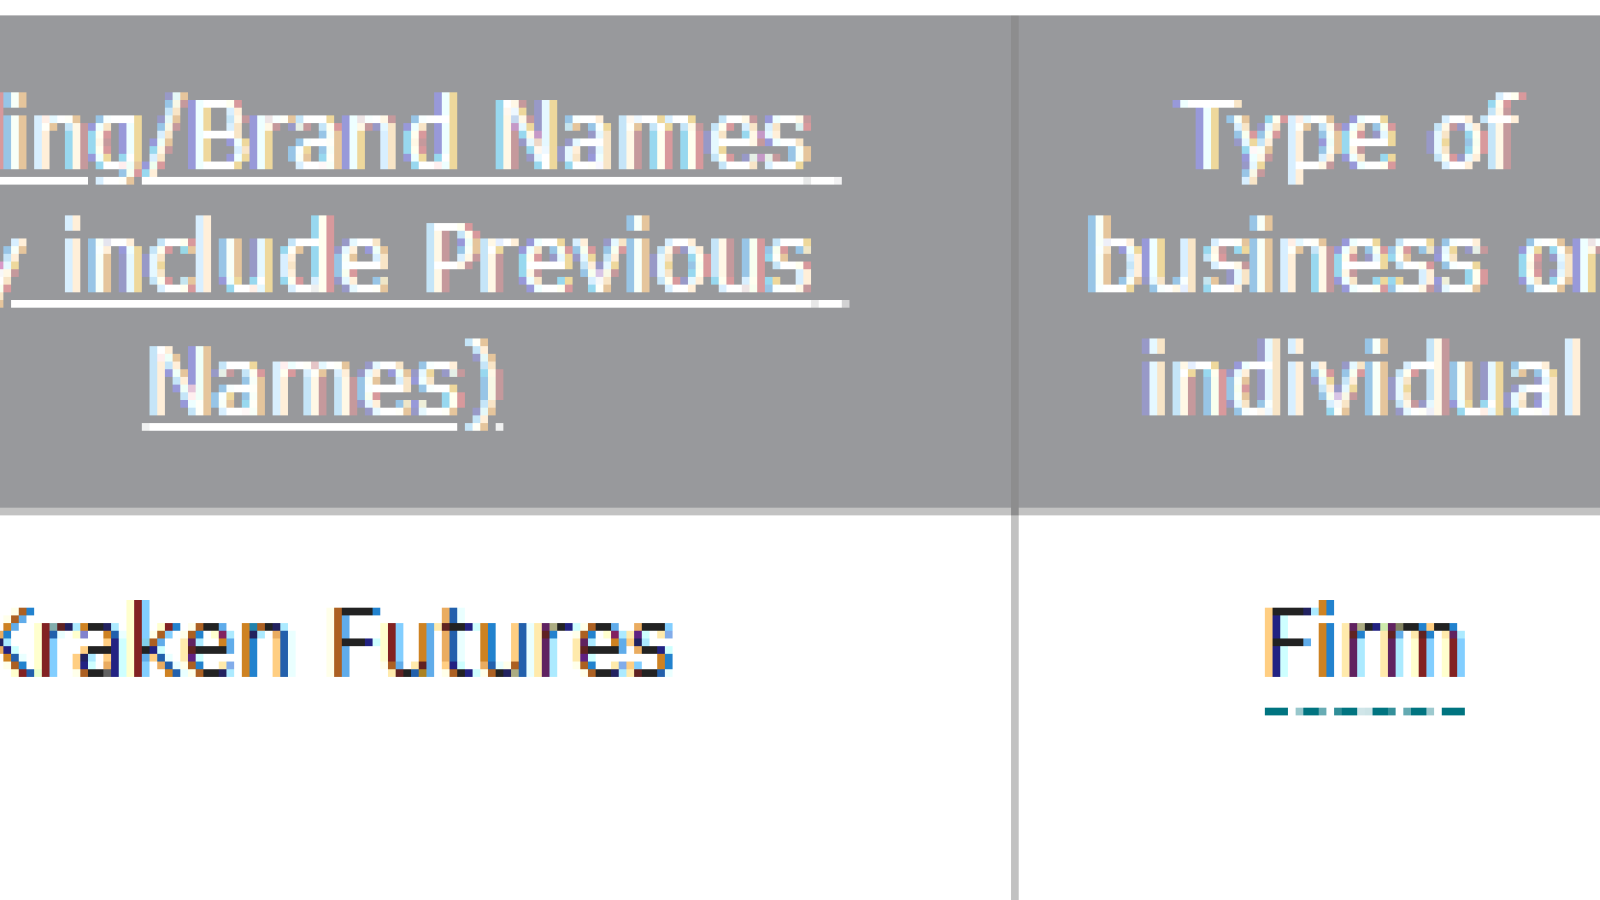 Kraken Futures is registered by the FCA